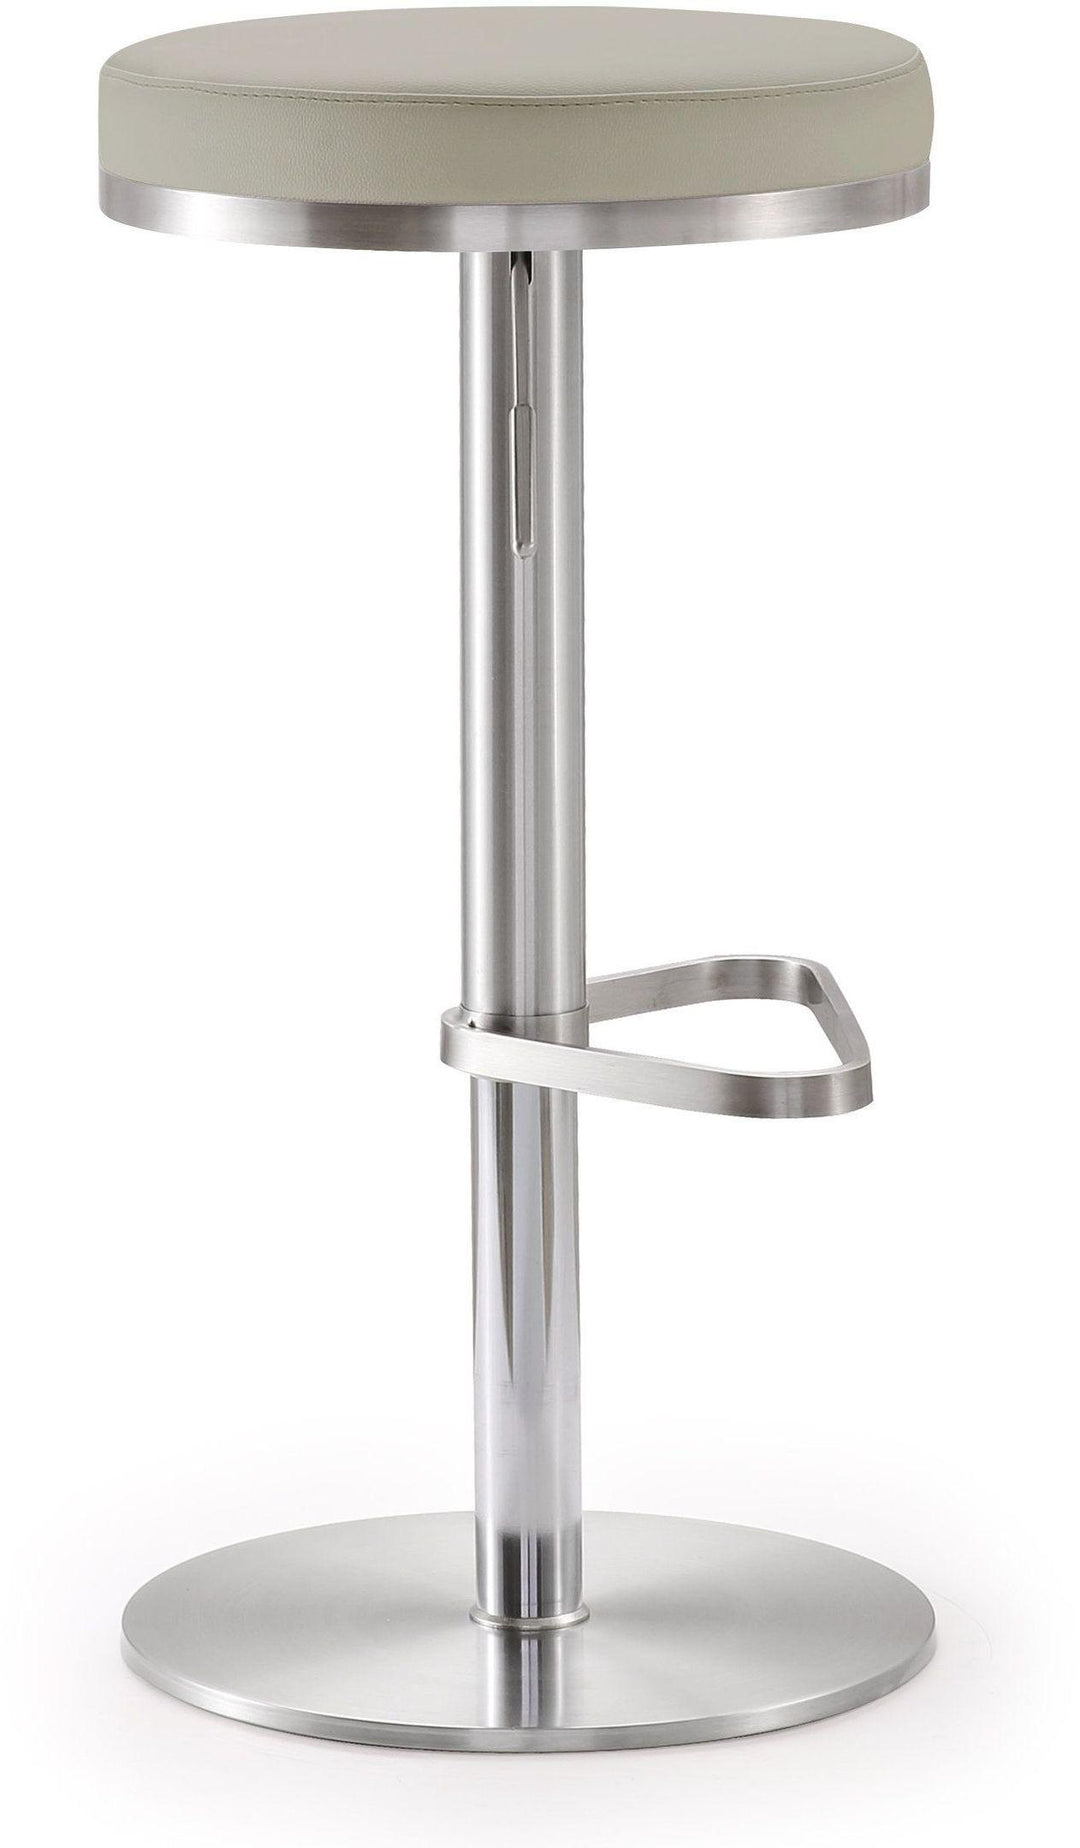 American Home Furniture | TOV Furniture - Fano Light Grey Stainless Steel Barstool